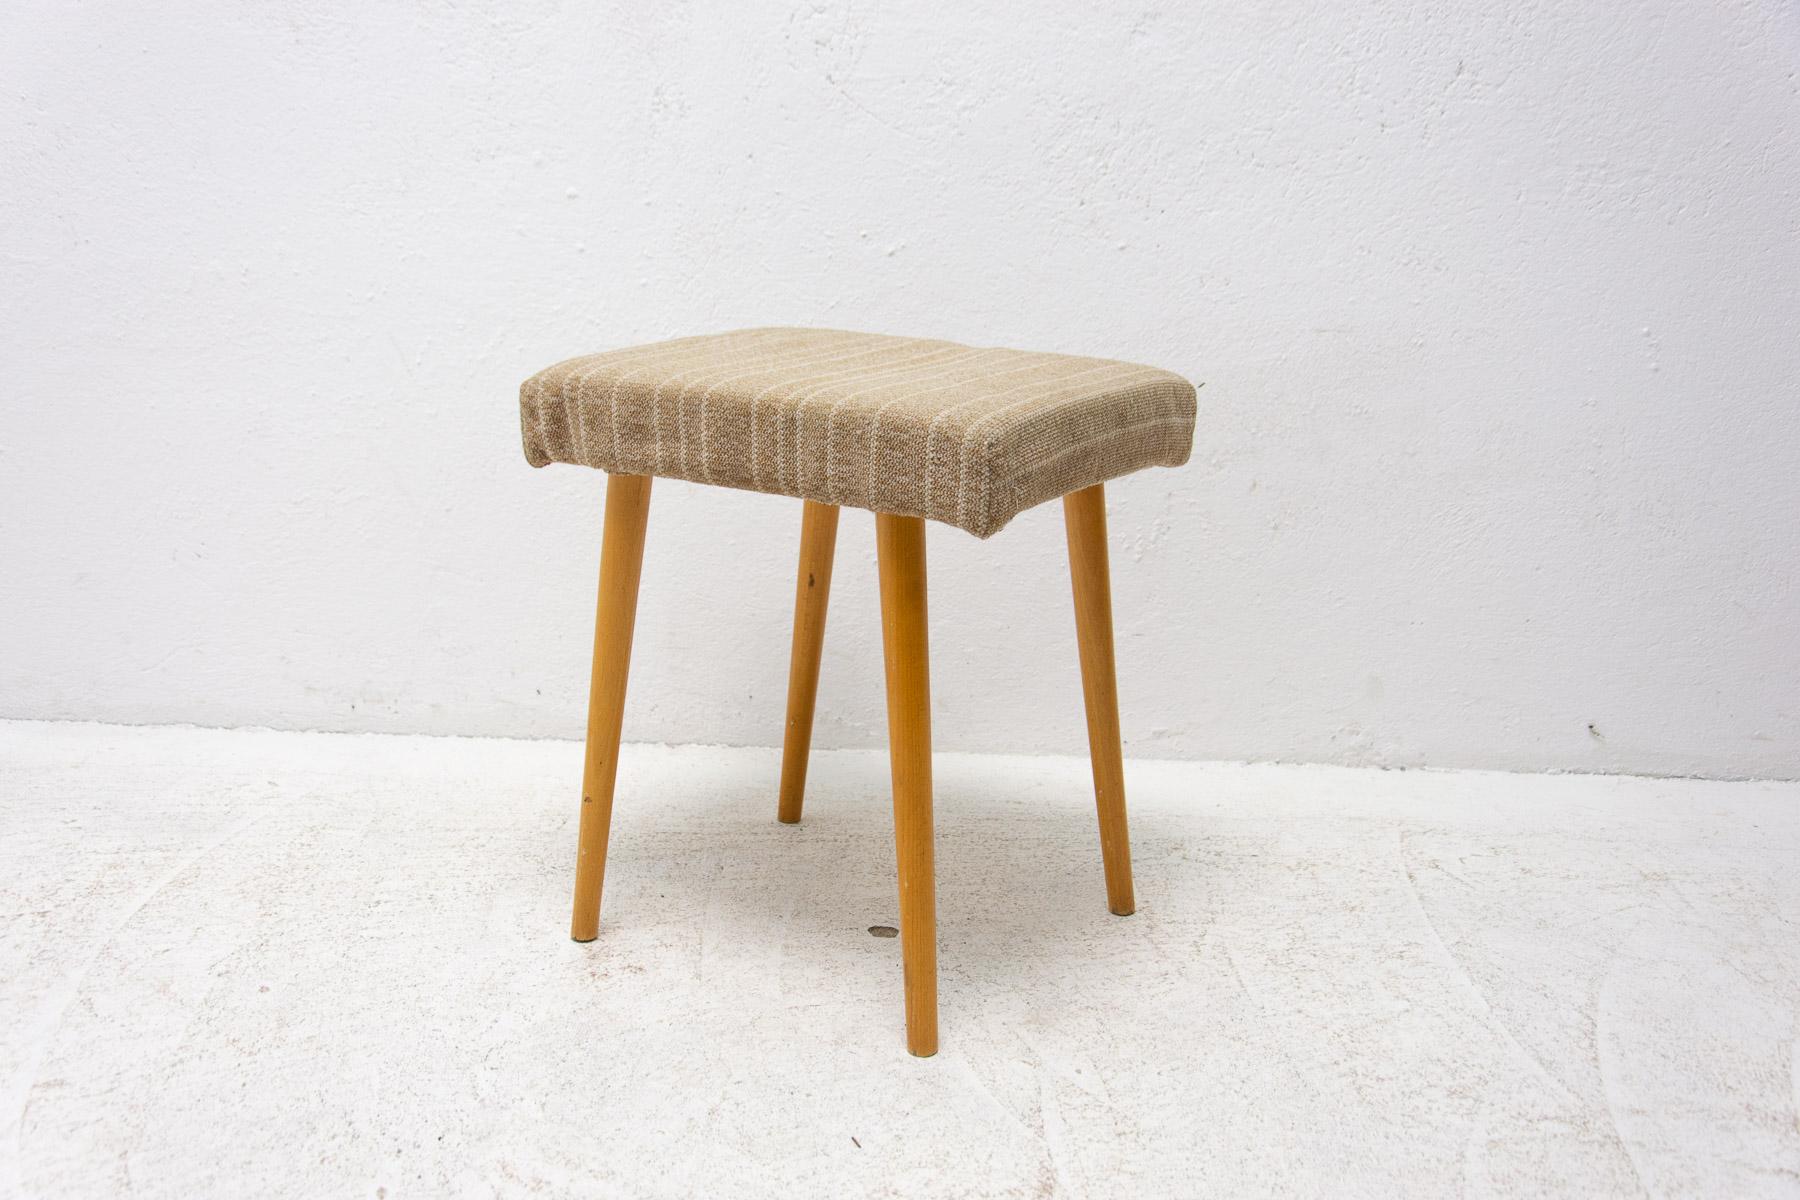 This stool / footrest was made in the former Czechoslovakia in the 1960's.

It's made of beech wood and it's upholstered in fabric. In good condition, shows slight signs of age and using.

Measures: height: 45 cm

Width: 40 cm

Depth: 34